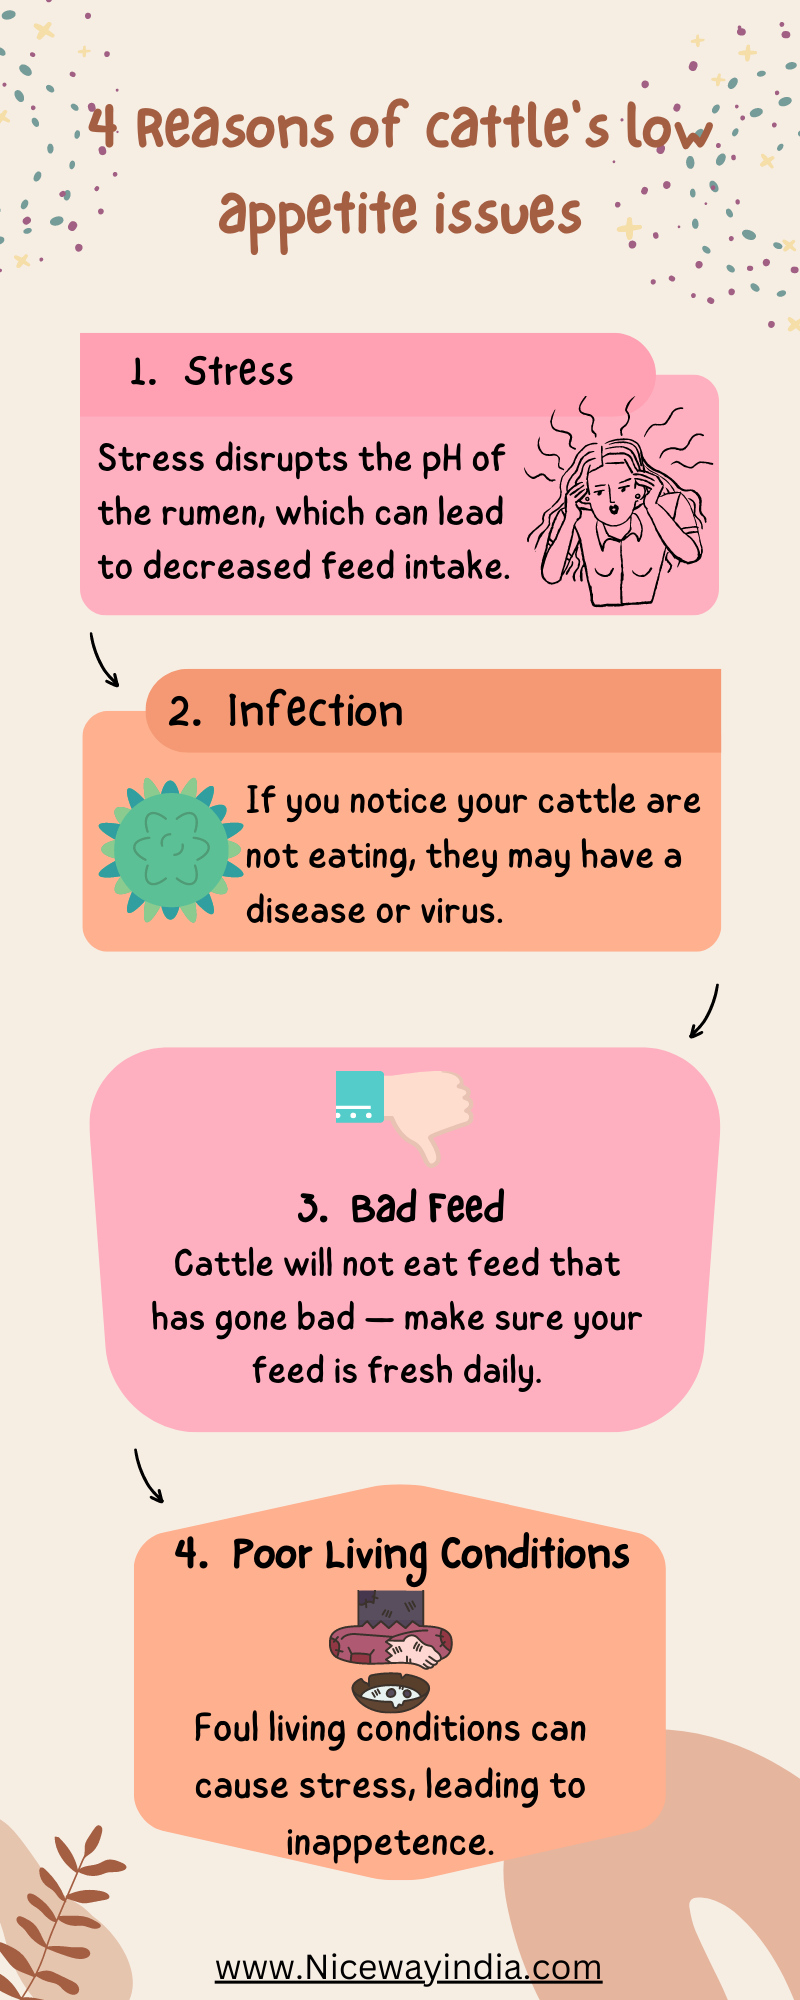 Y Reasons of cattle's low: :
:~.- appetite issues

1. Stress

Stress disrupts the pH of
the rumen, which can lead
to decreased feed intake.

 

2. Infection

" = “ If you notice your cattle are

v

3 &lt; . “not eating, they may have a
Fe disease or virus.

5. Bad Feed
Cattle will not eat feed that
has gone bad — make sure your
feed is fresh daily.

\

4. Poor Living Conditions

